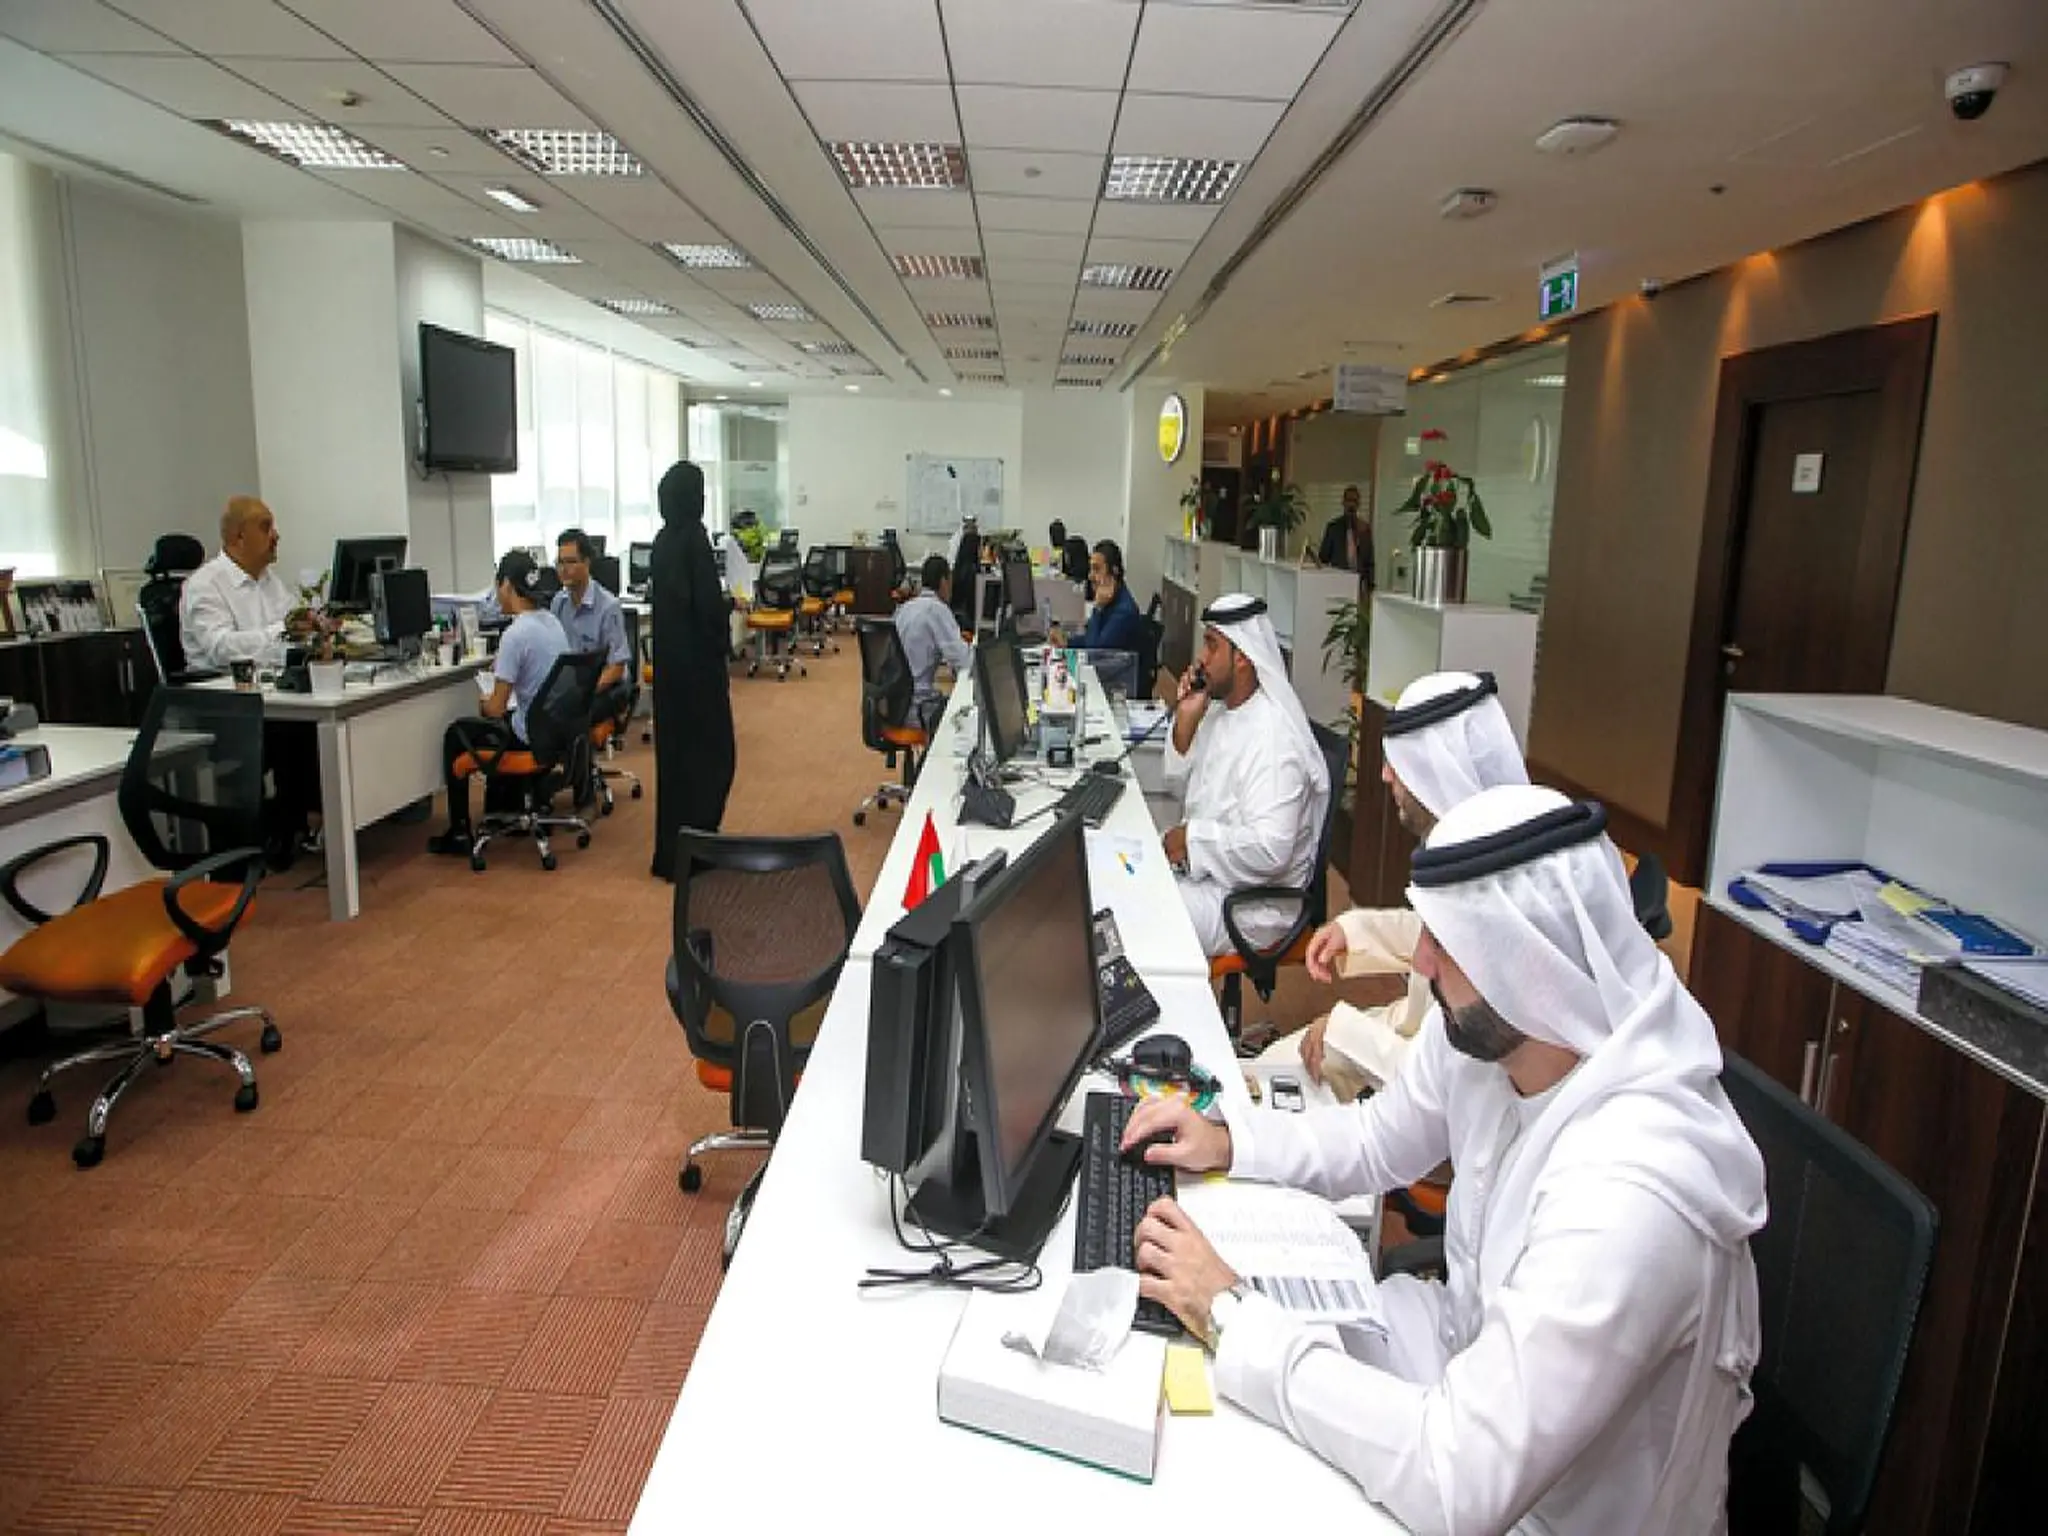 UAE Details of recently announced jobs